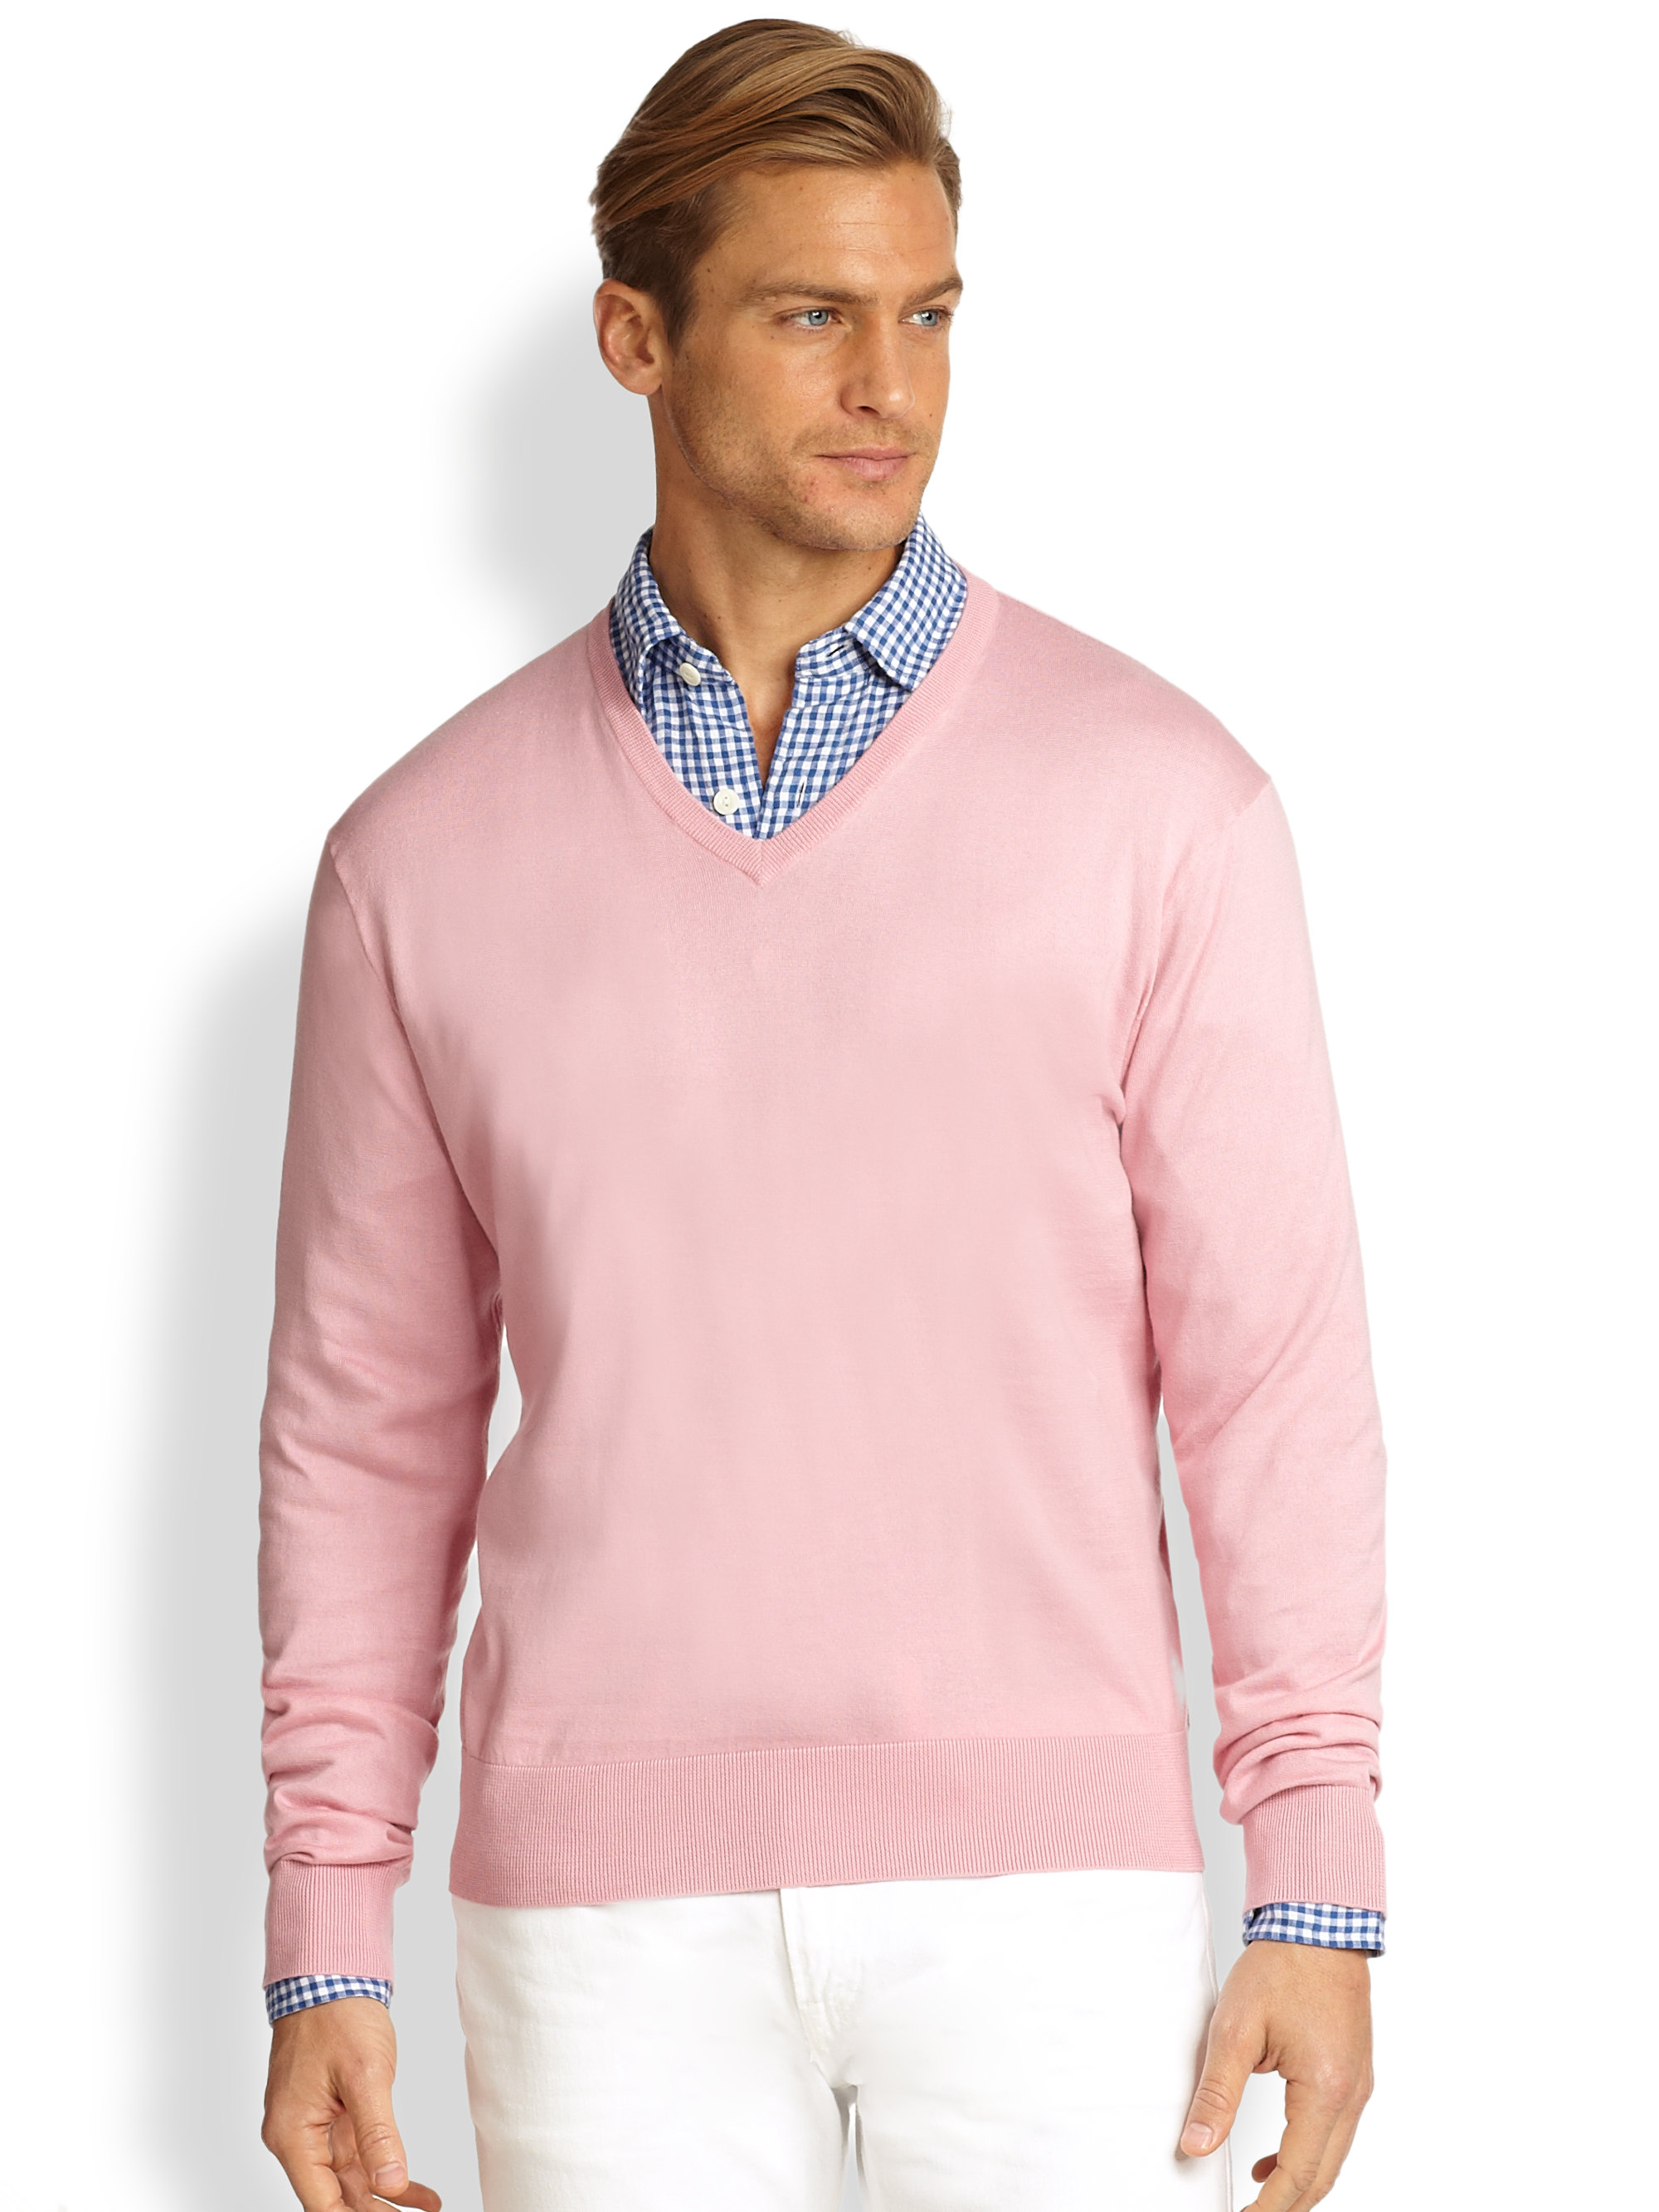 Lyst - Polo Ralph Lauren Cotton V-neck Sweater in Pink for Men